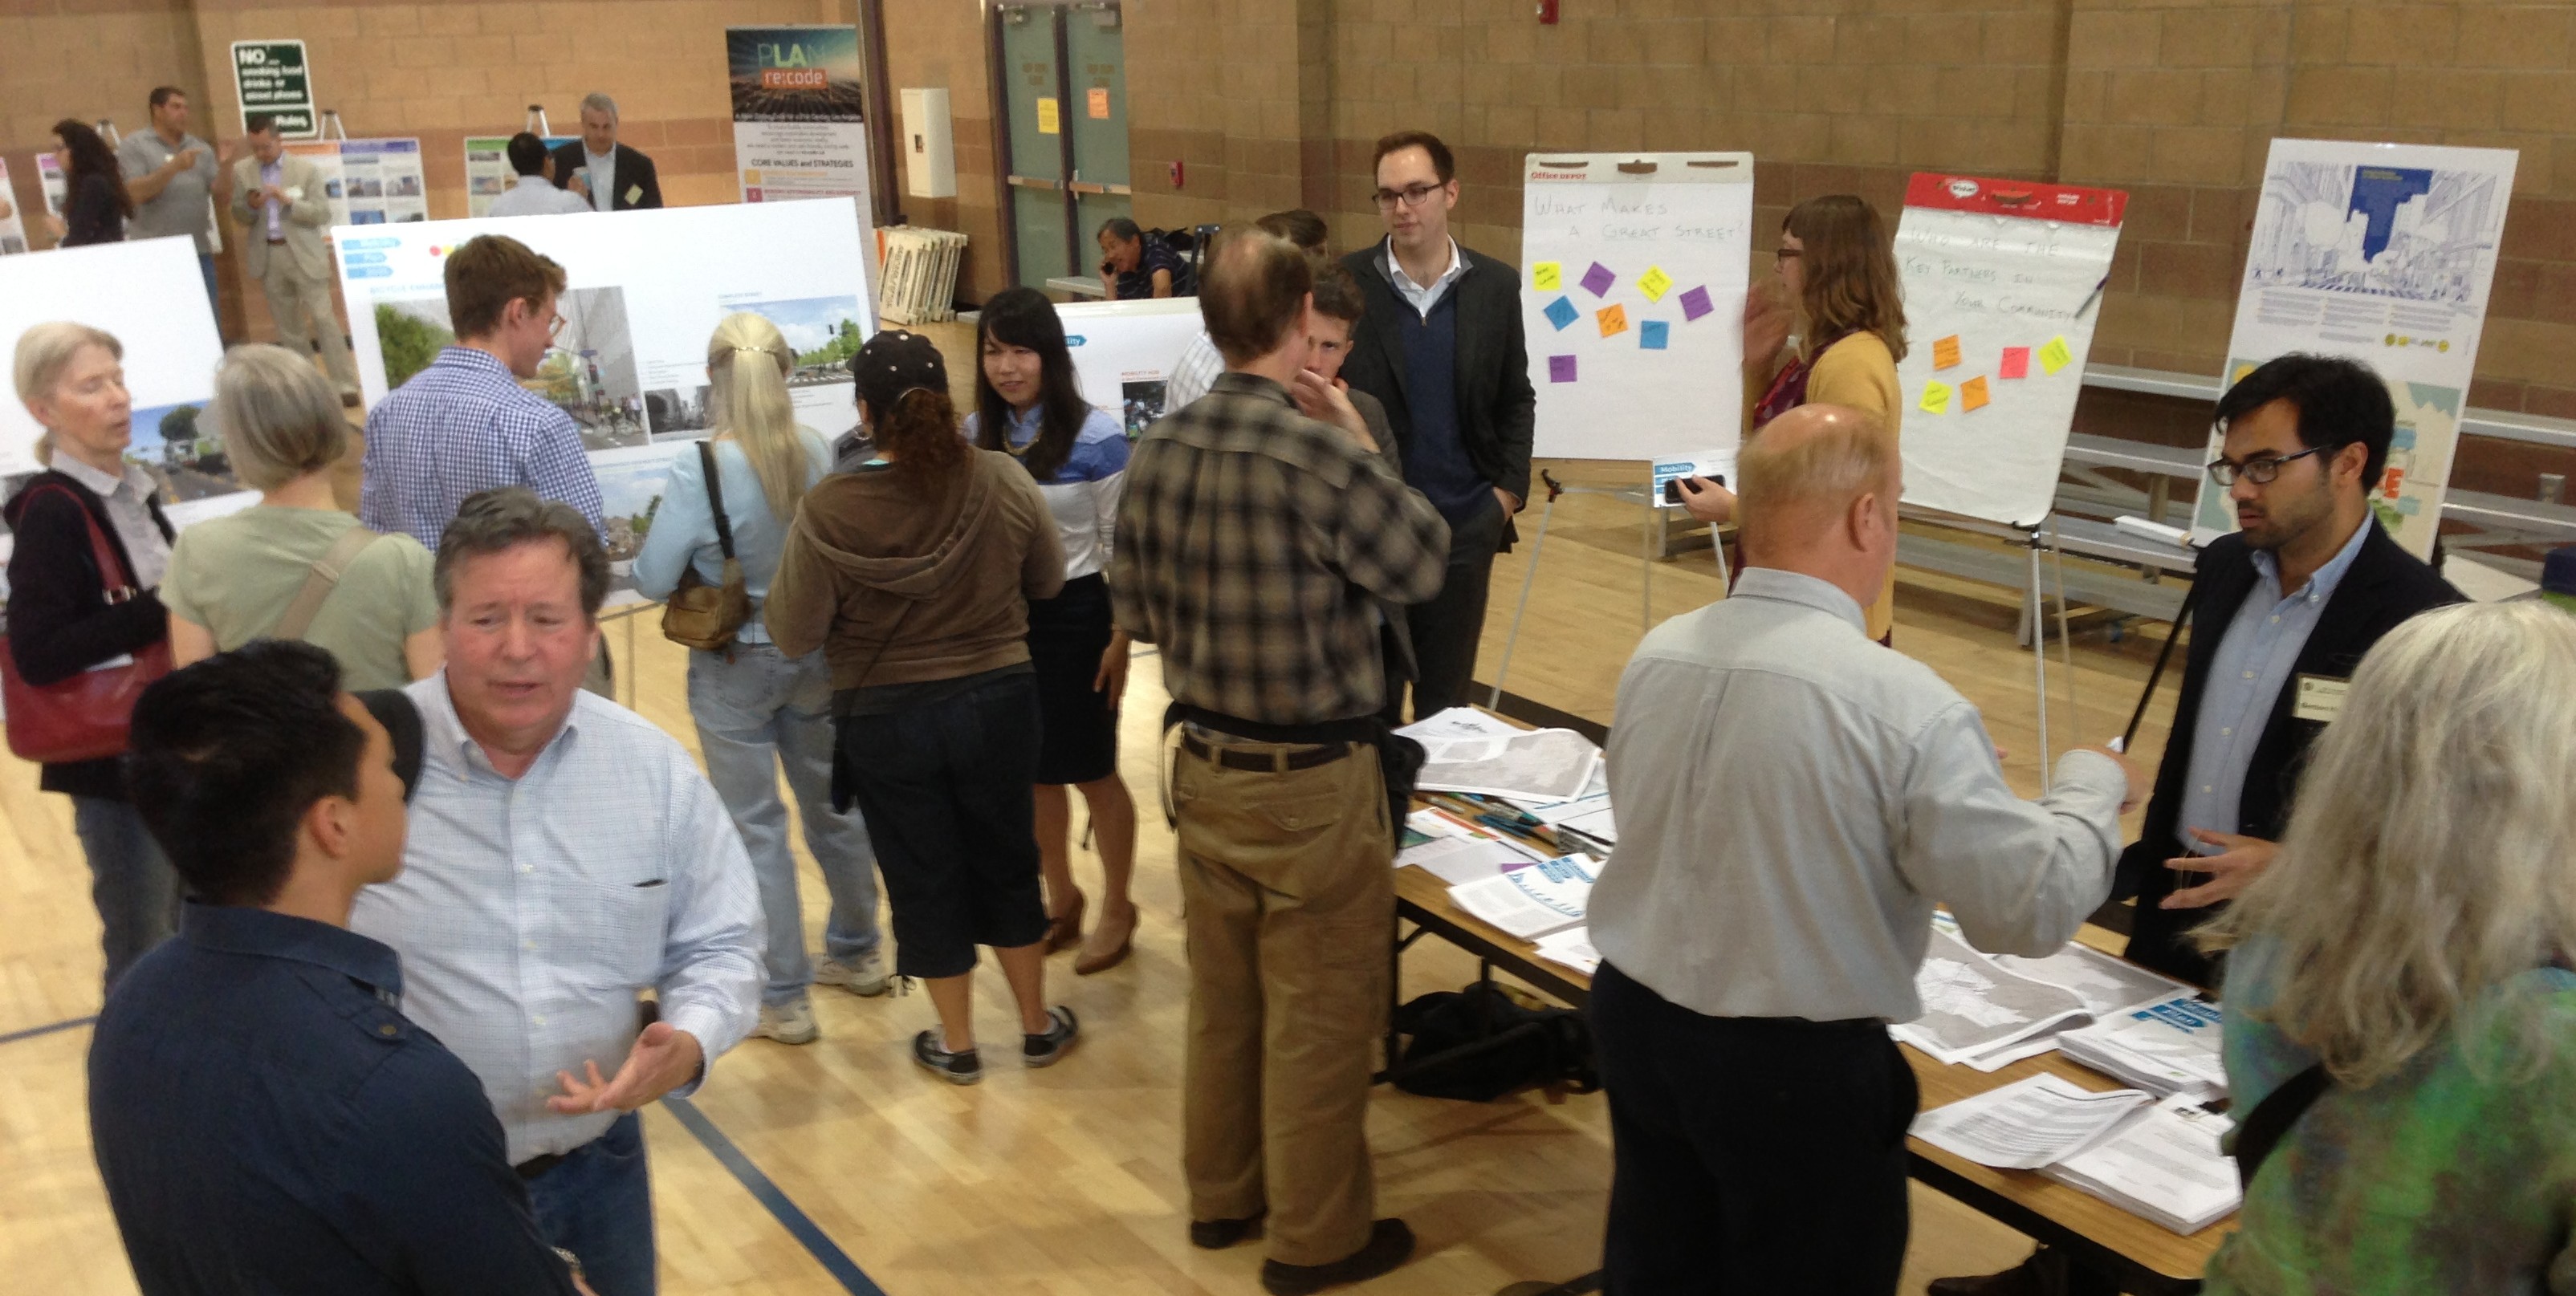 Attendees learn about and comment on L.A. City's draft Mobility Plan 2035 - at last Saturday's community planning forum in Granada Hills. Joe Linton/LA Streetsblog